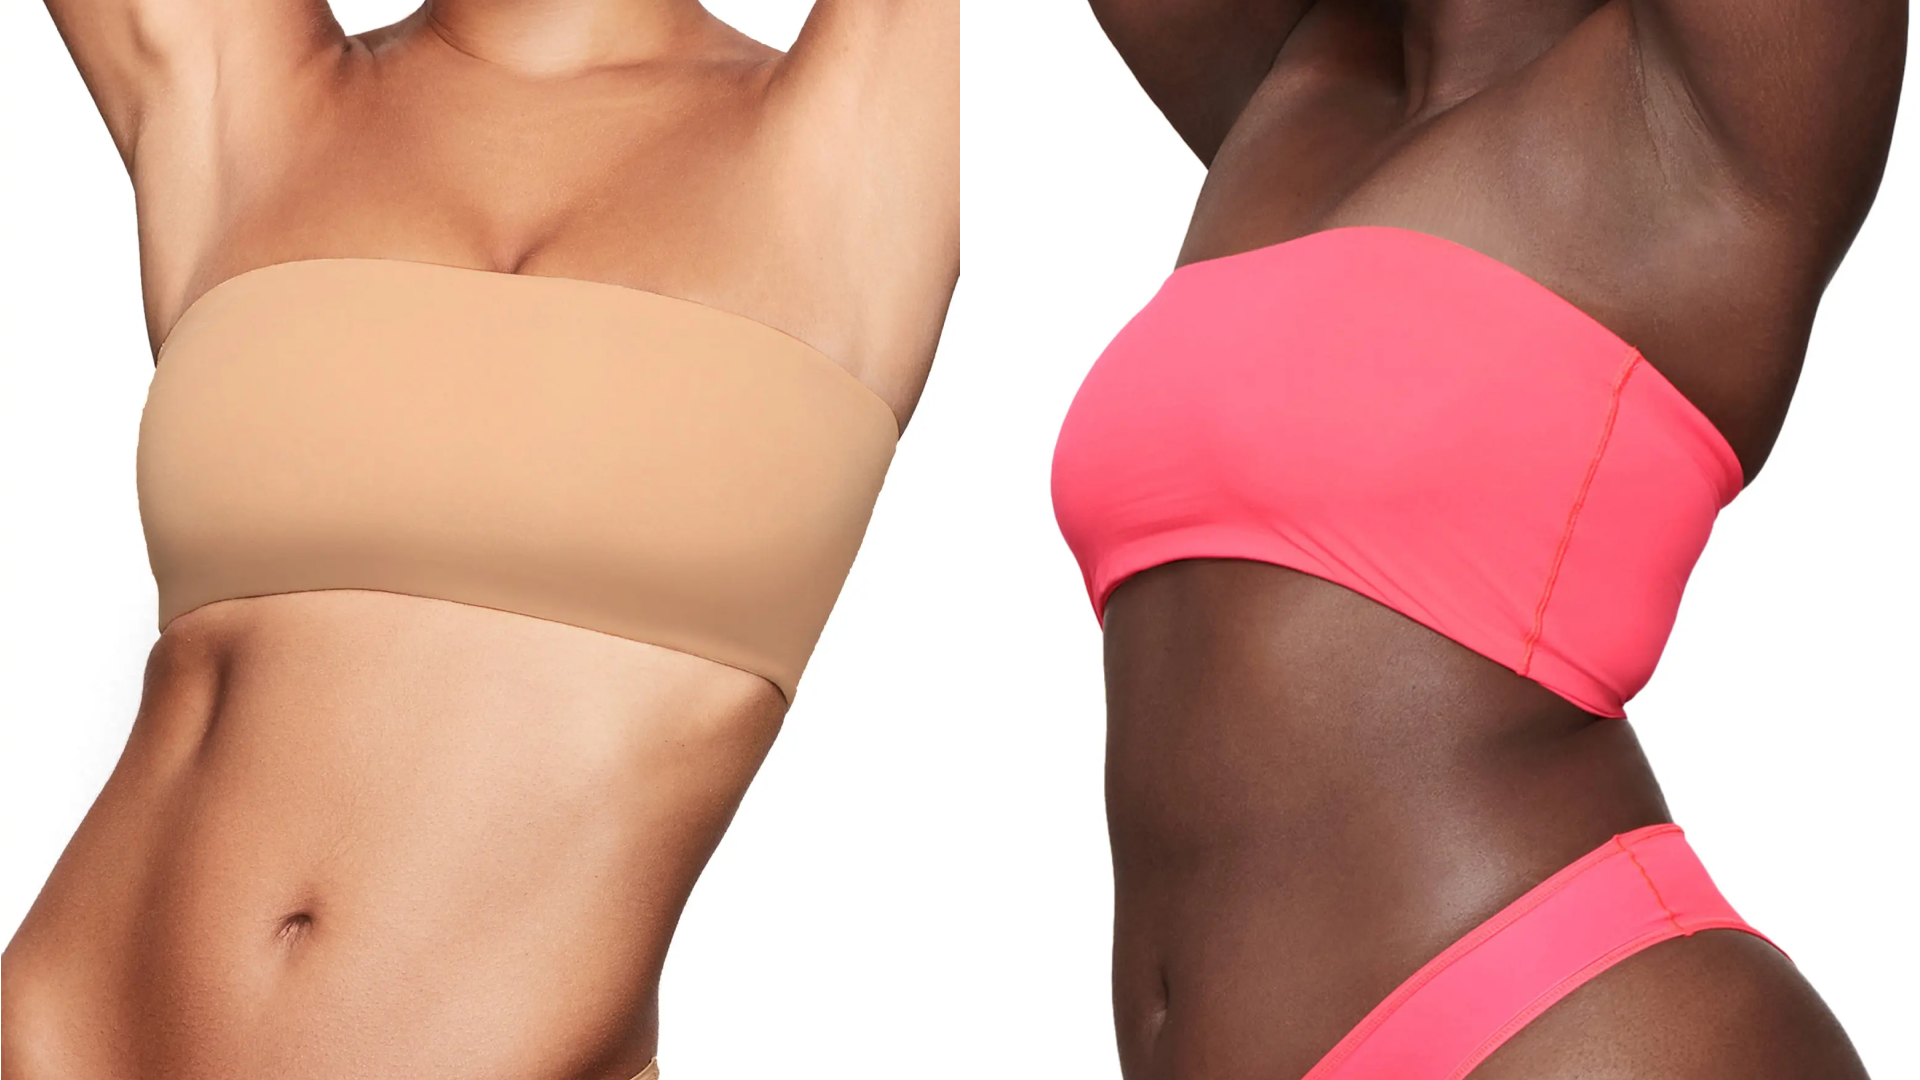 SKIMS - The Mesh Strapless Bra is the ideal strapless styling